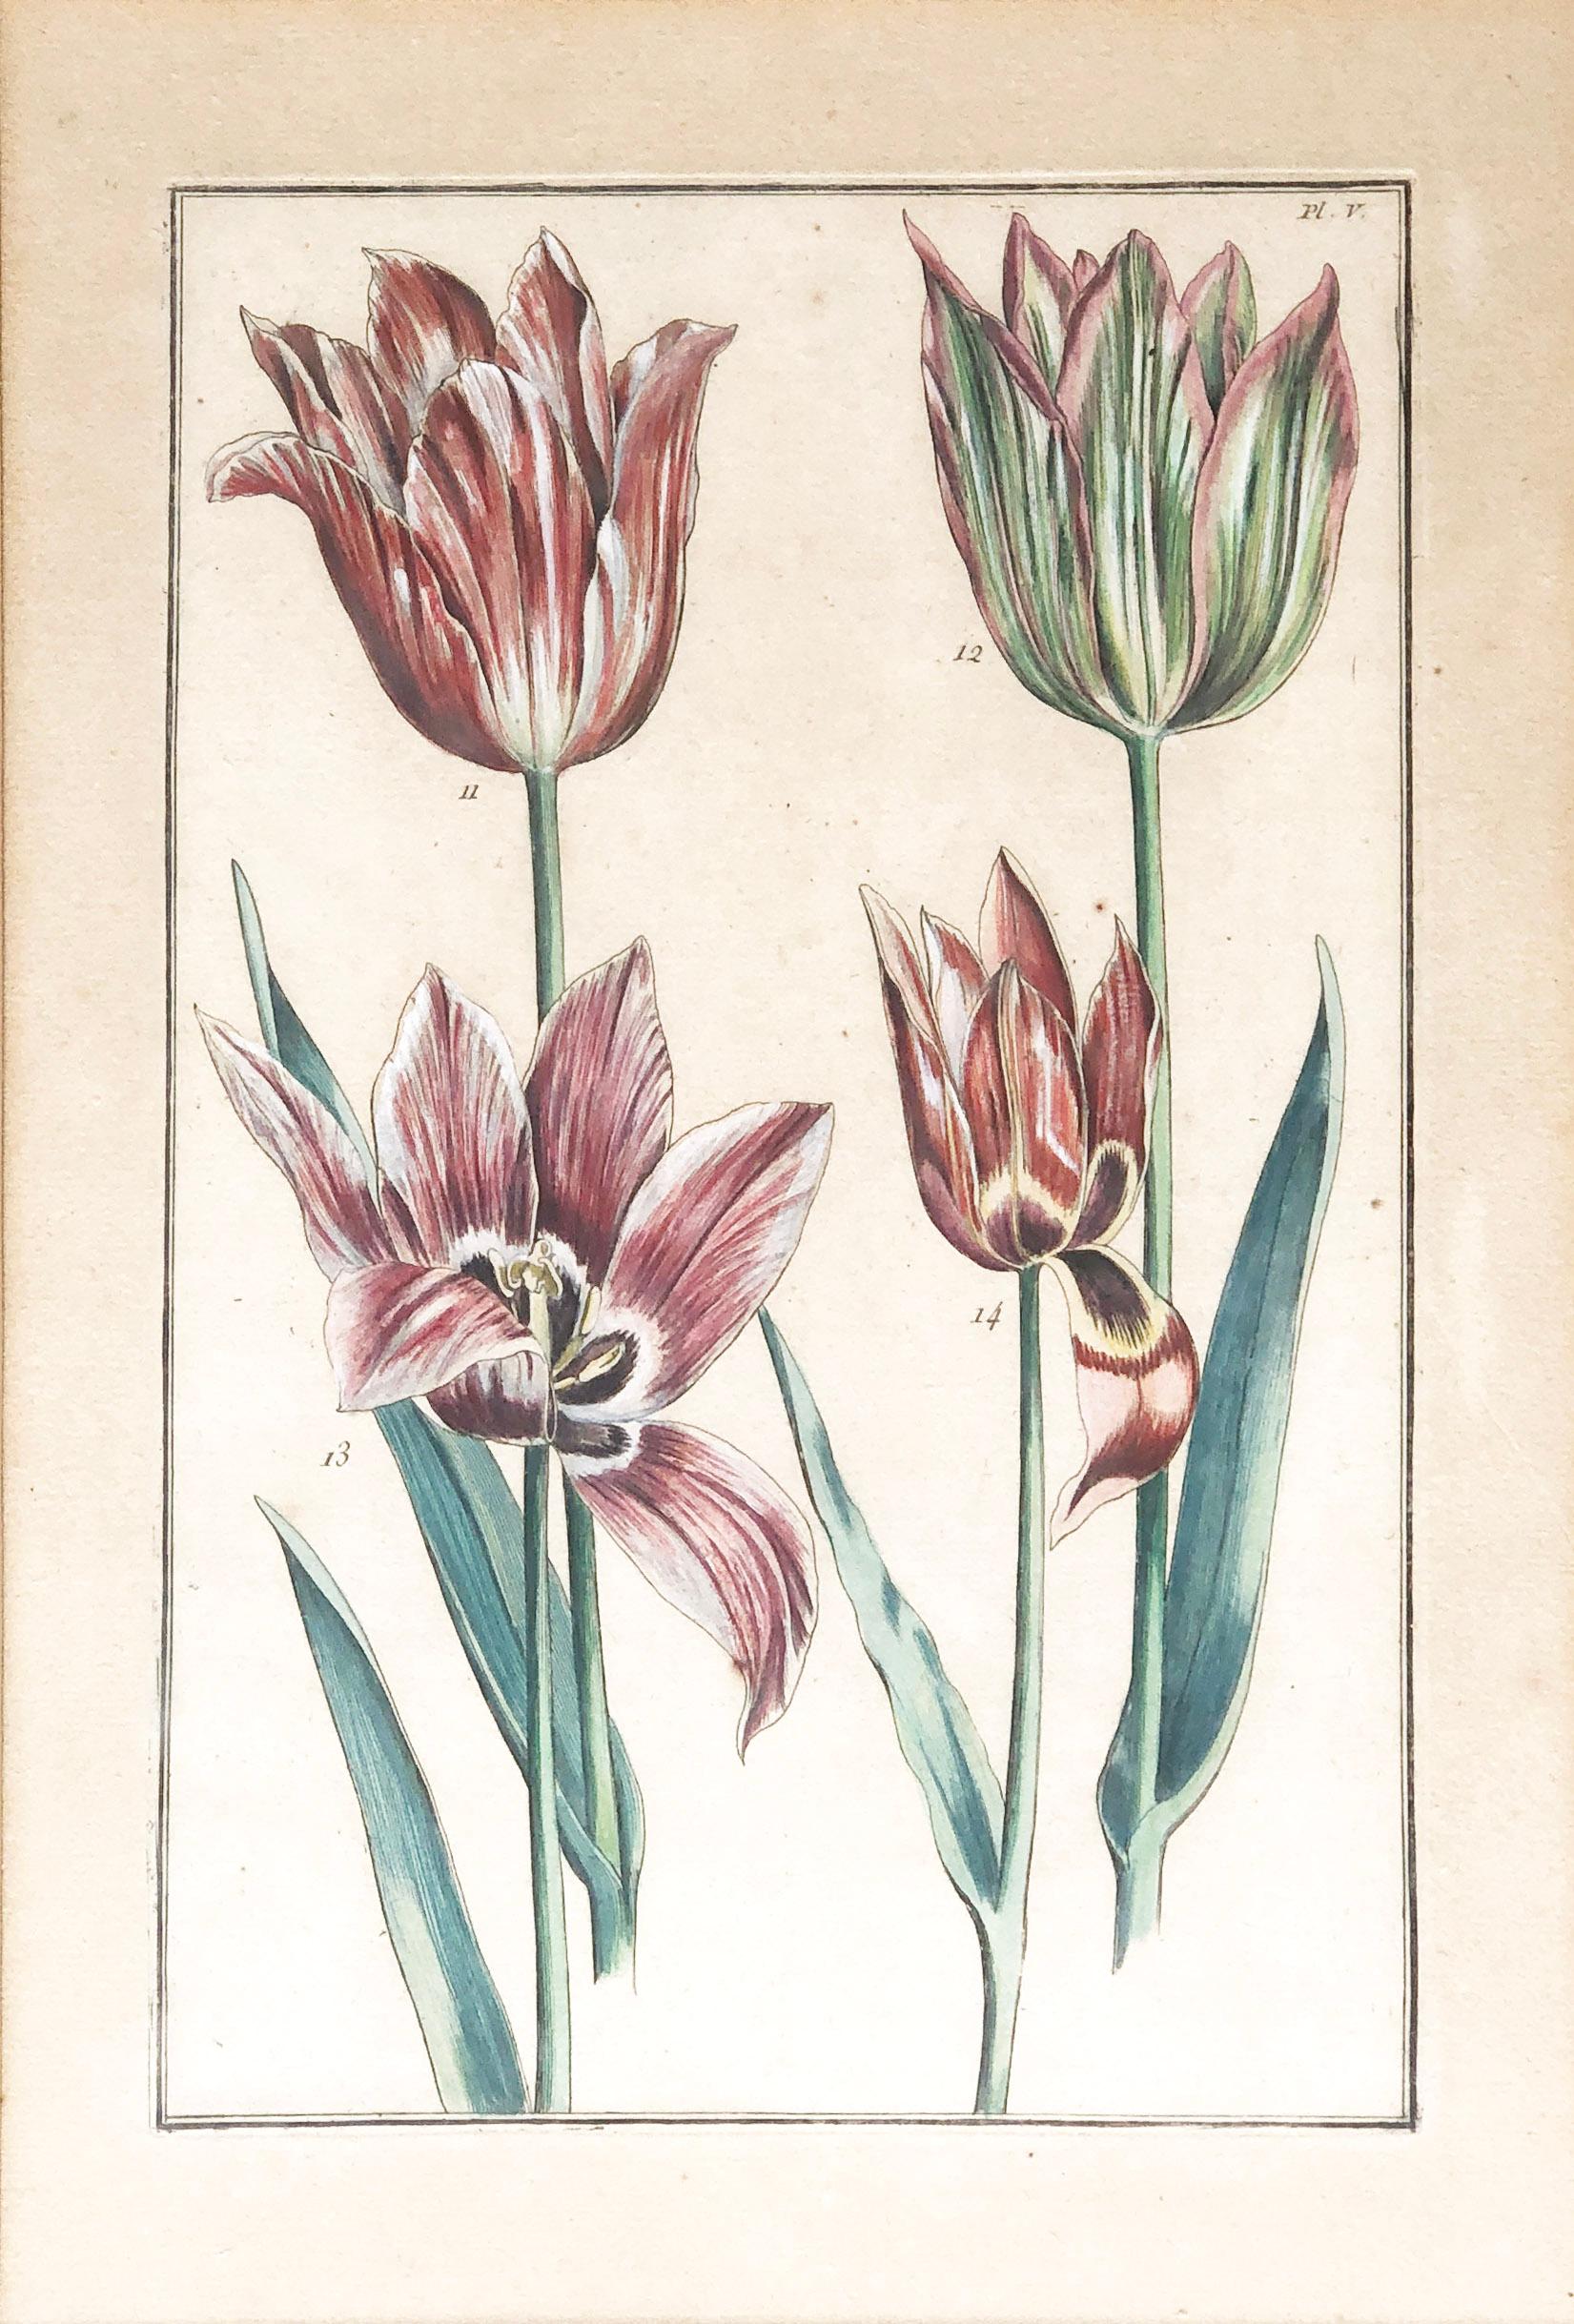 ONE OF THE MOST BEAUTIFUL TULIP ENGRAVINGS EVER PUBLISHED Four Tulips PL.V. (plate 5), copper engraving made by Em(m)anuel Sweert(s) and published by Daniel Rabel in Paris 1622-1633 as part of the 